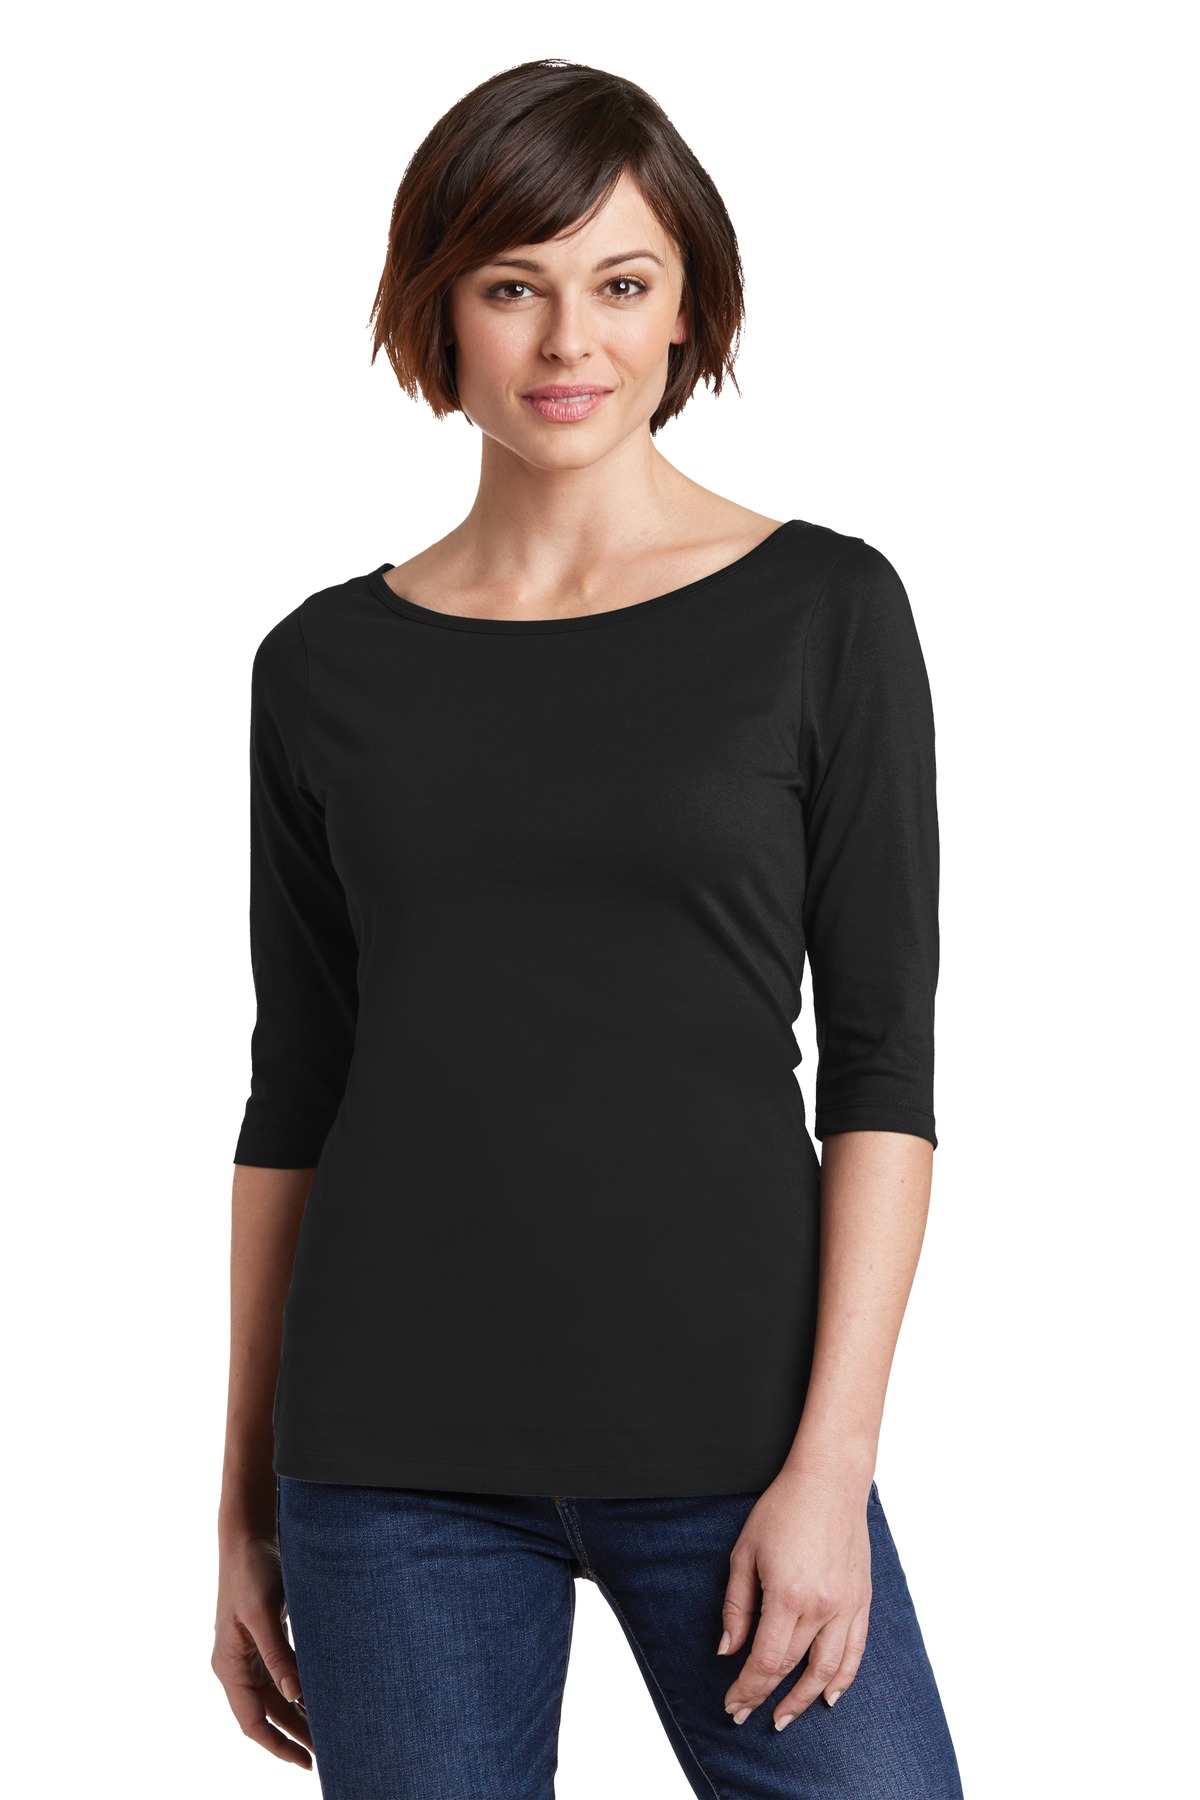 District Womens Perfect Weight 3/4-Sleeve Tee. DM107L